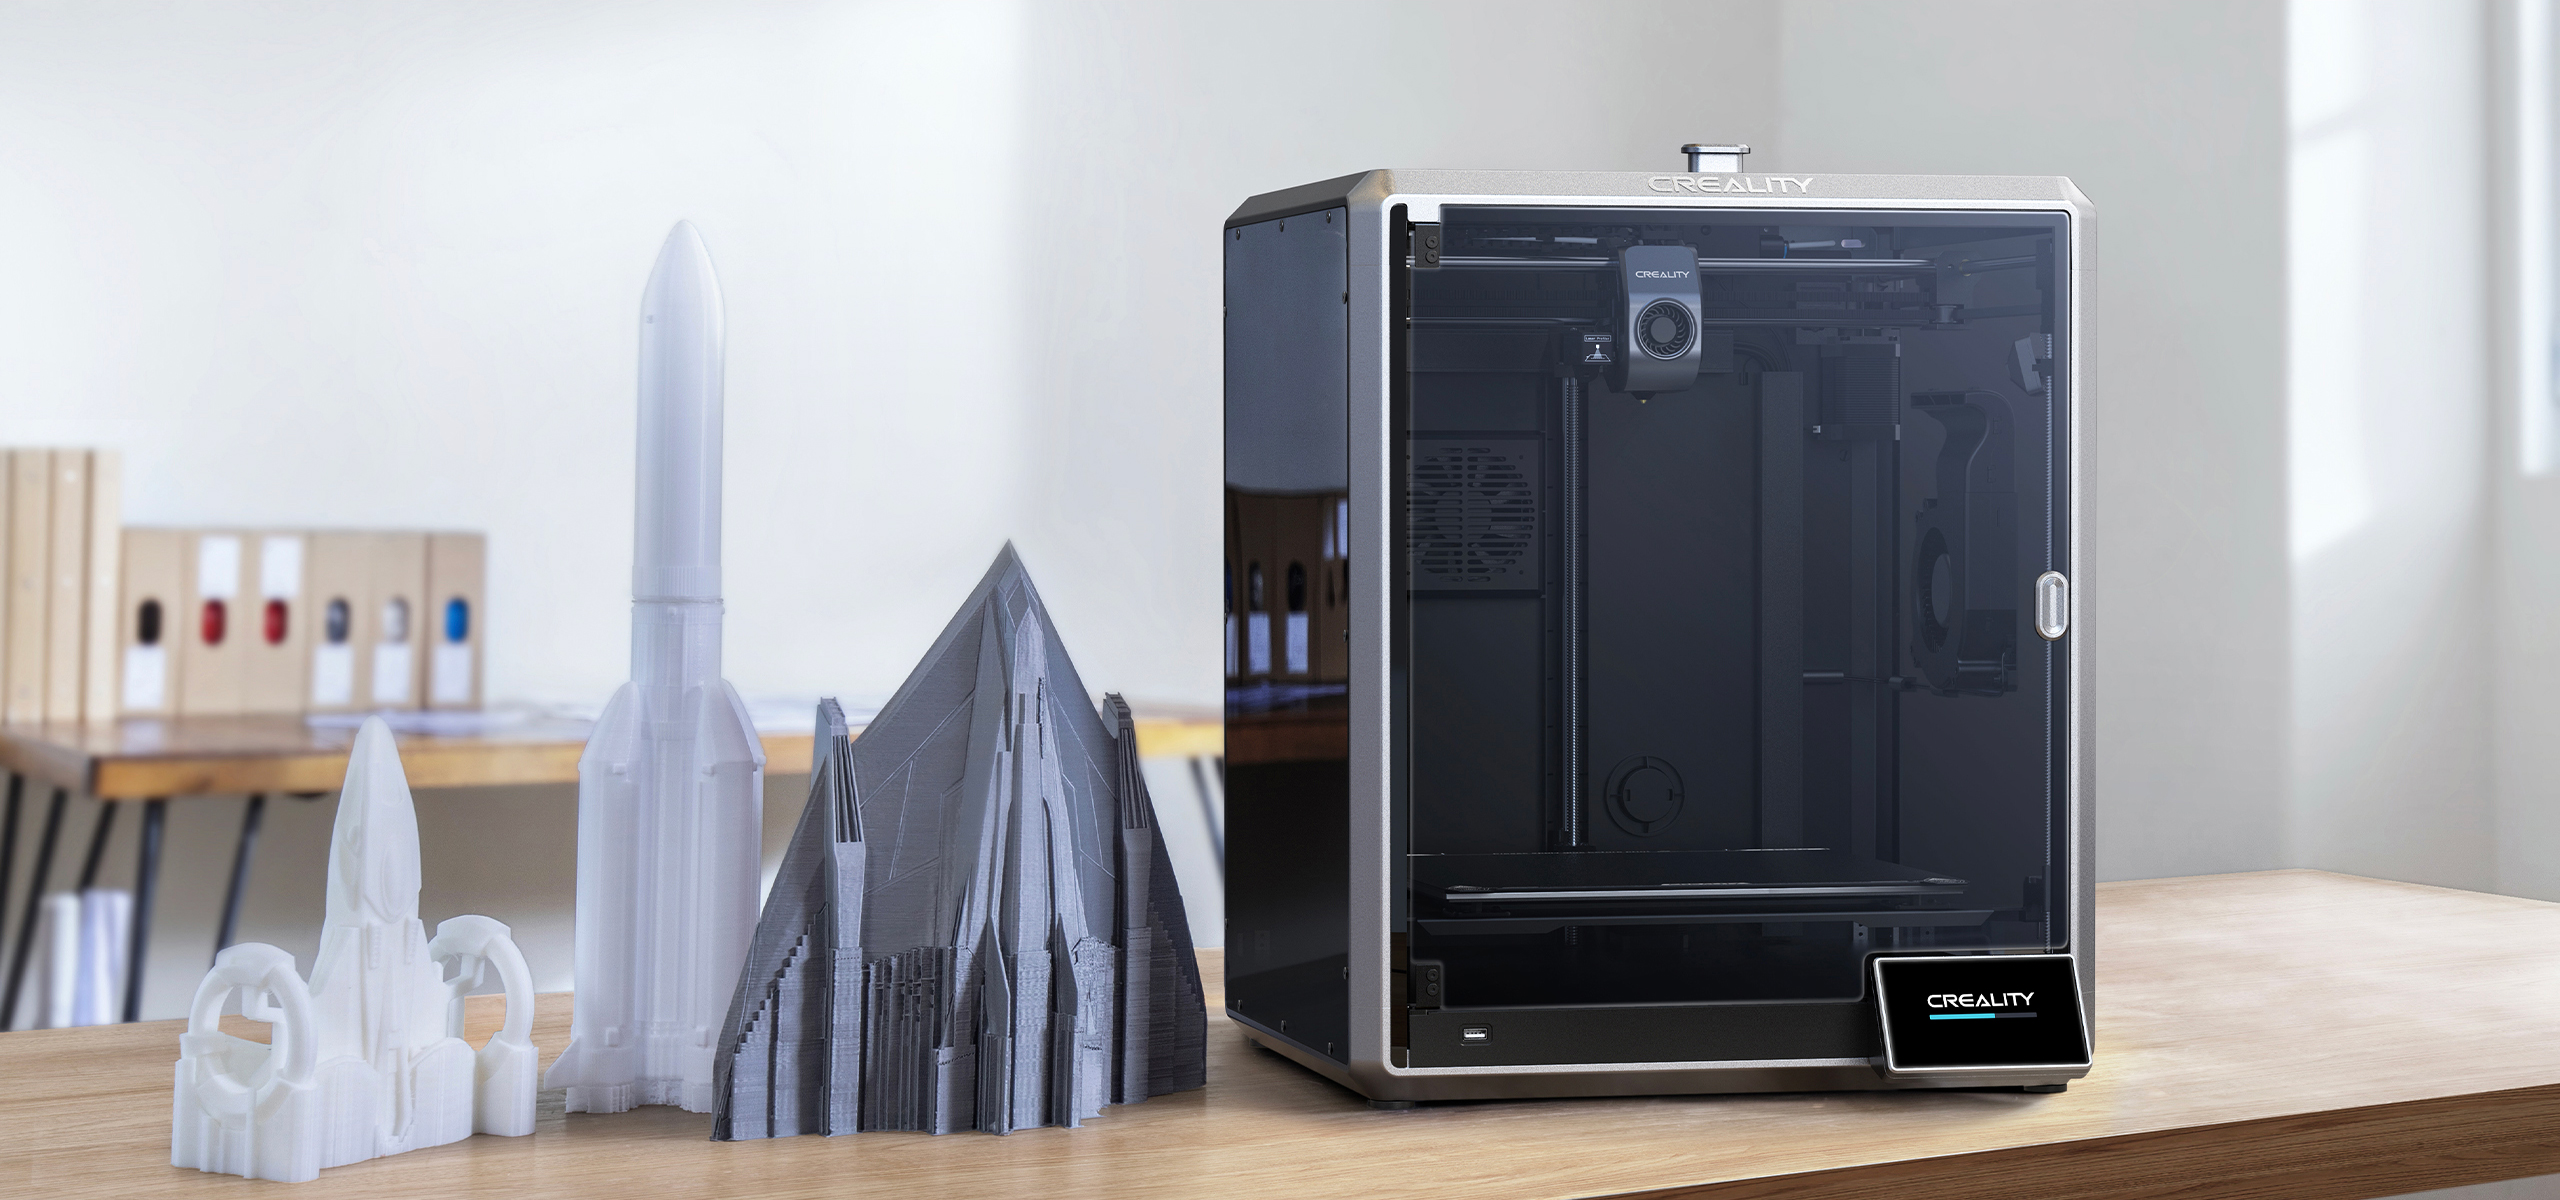 Official sales for Creality's new K1 and K1 Max AI speedy 3D printers - 3D Printing Industry